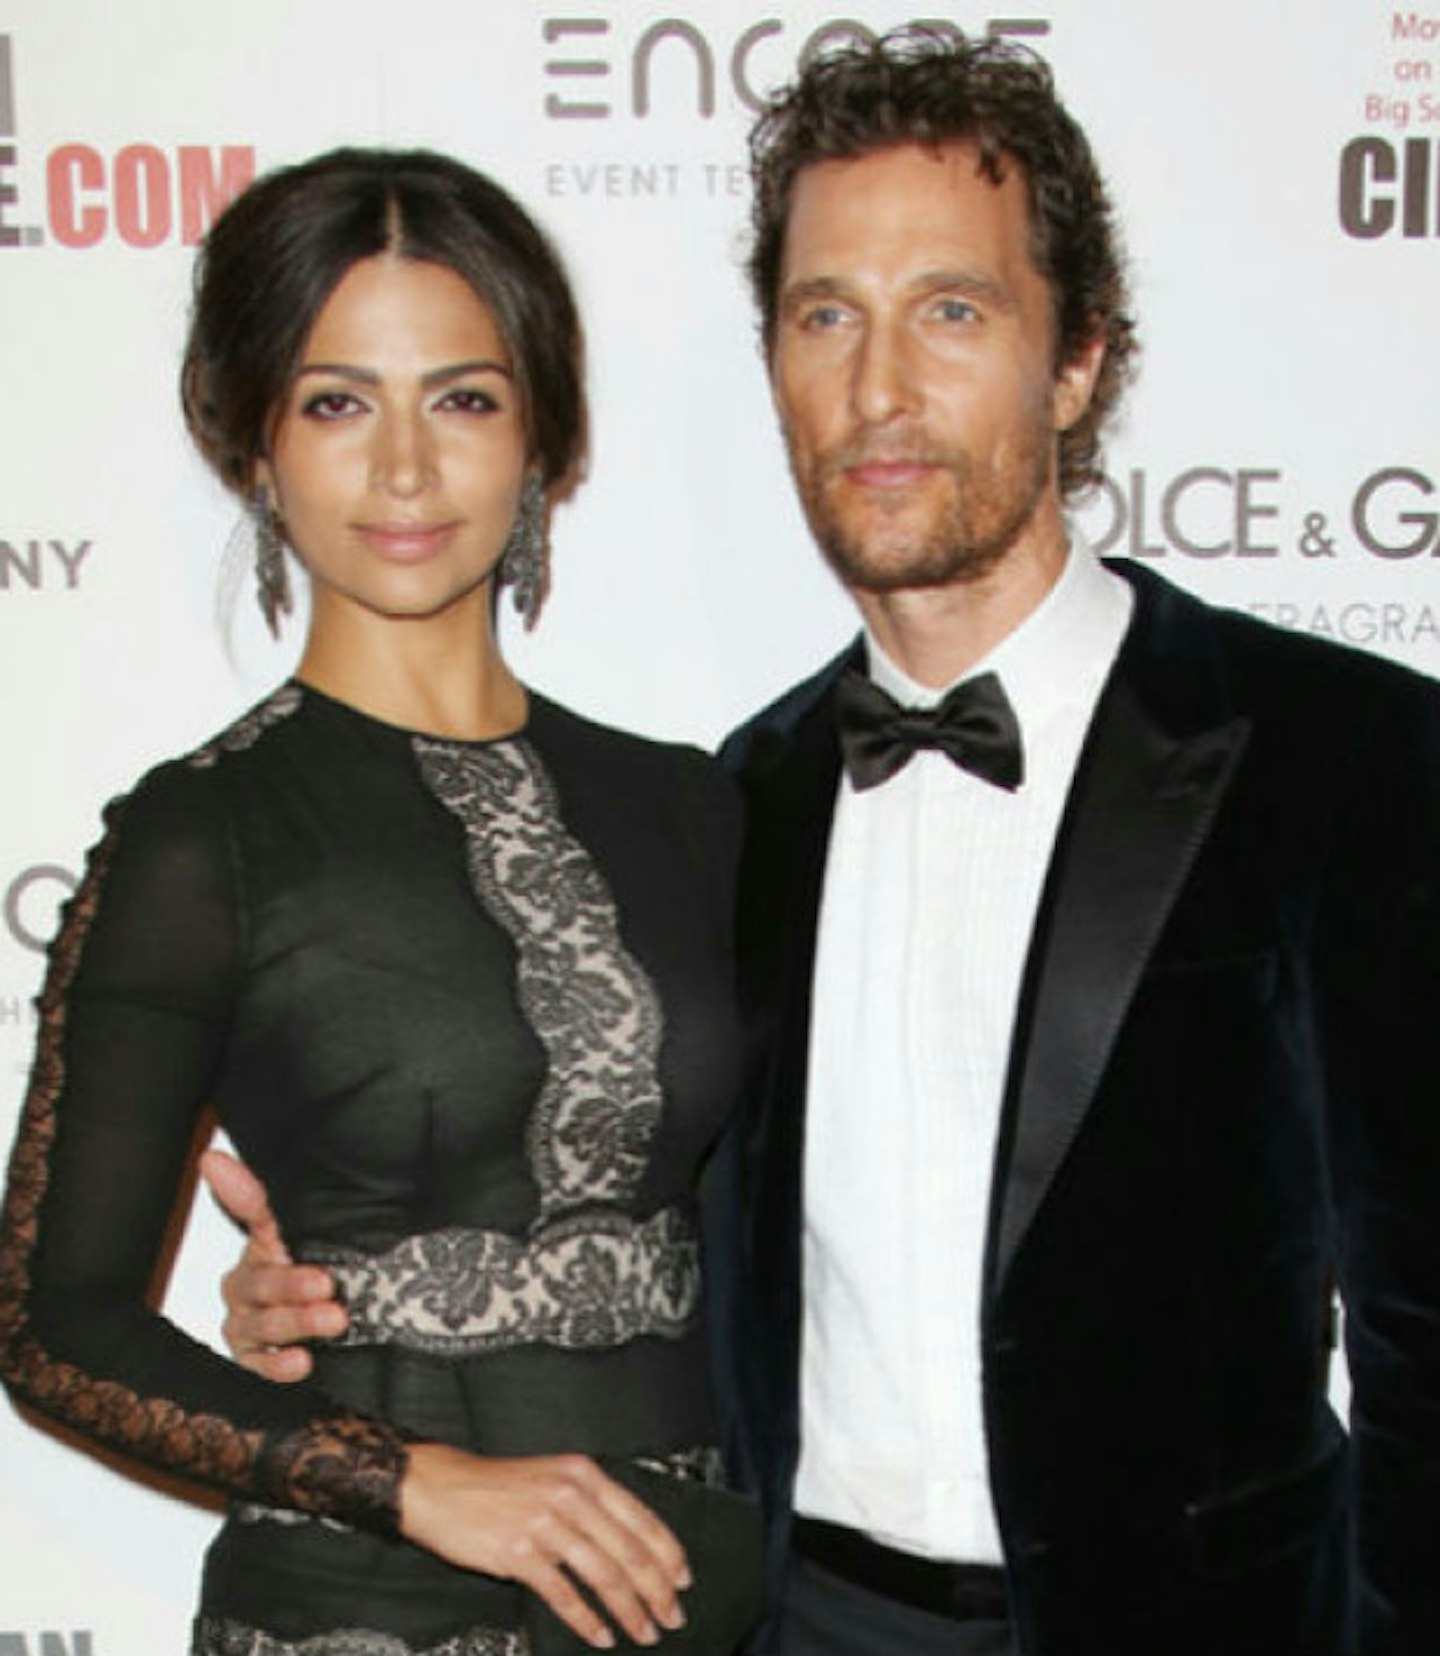 Matthew with his wife, Camila Alves, in Cannes.